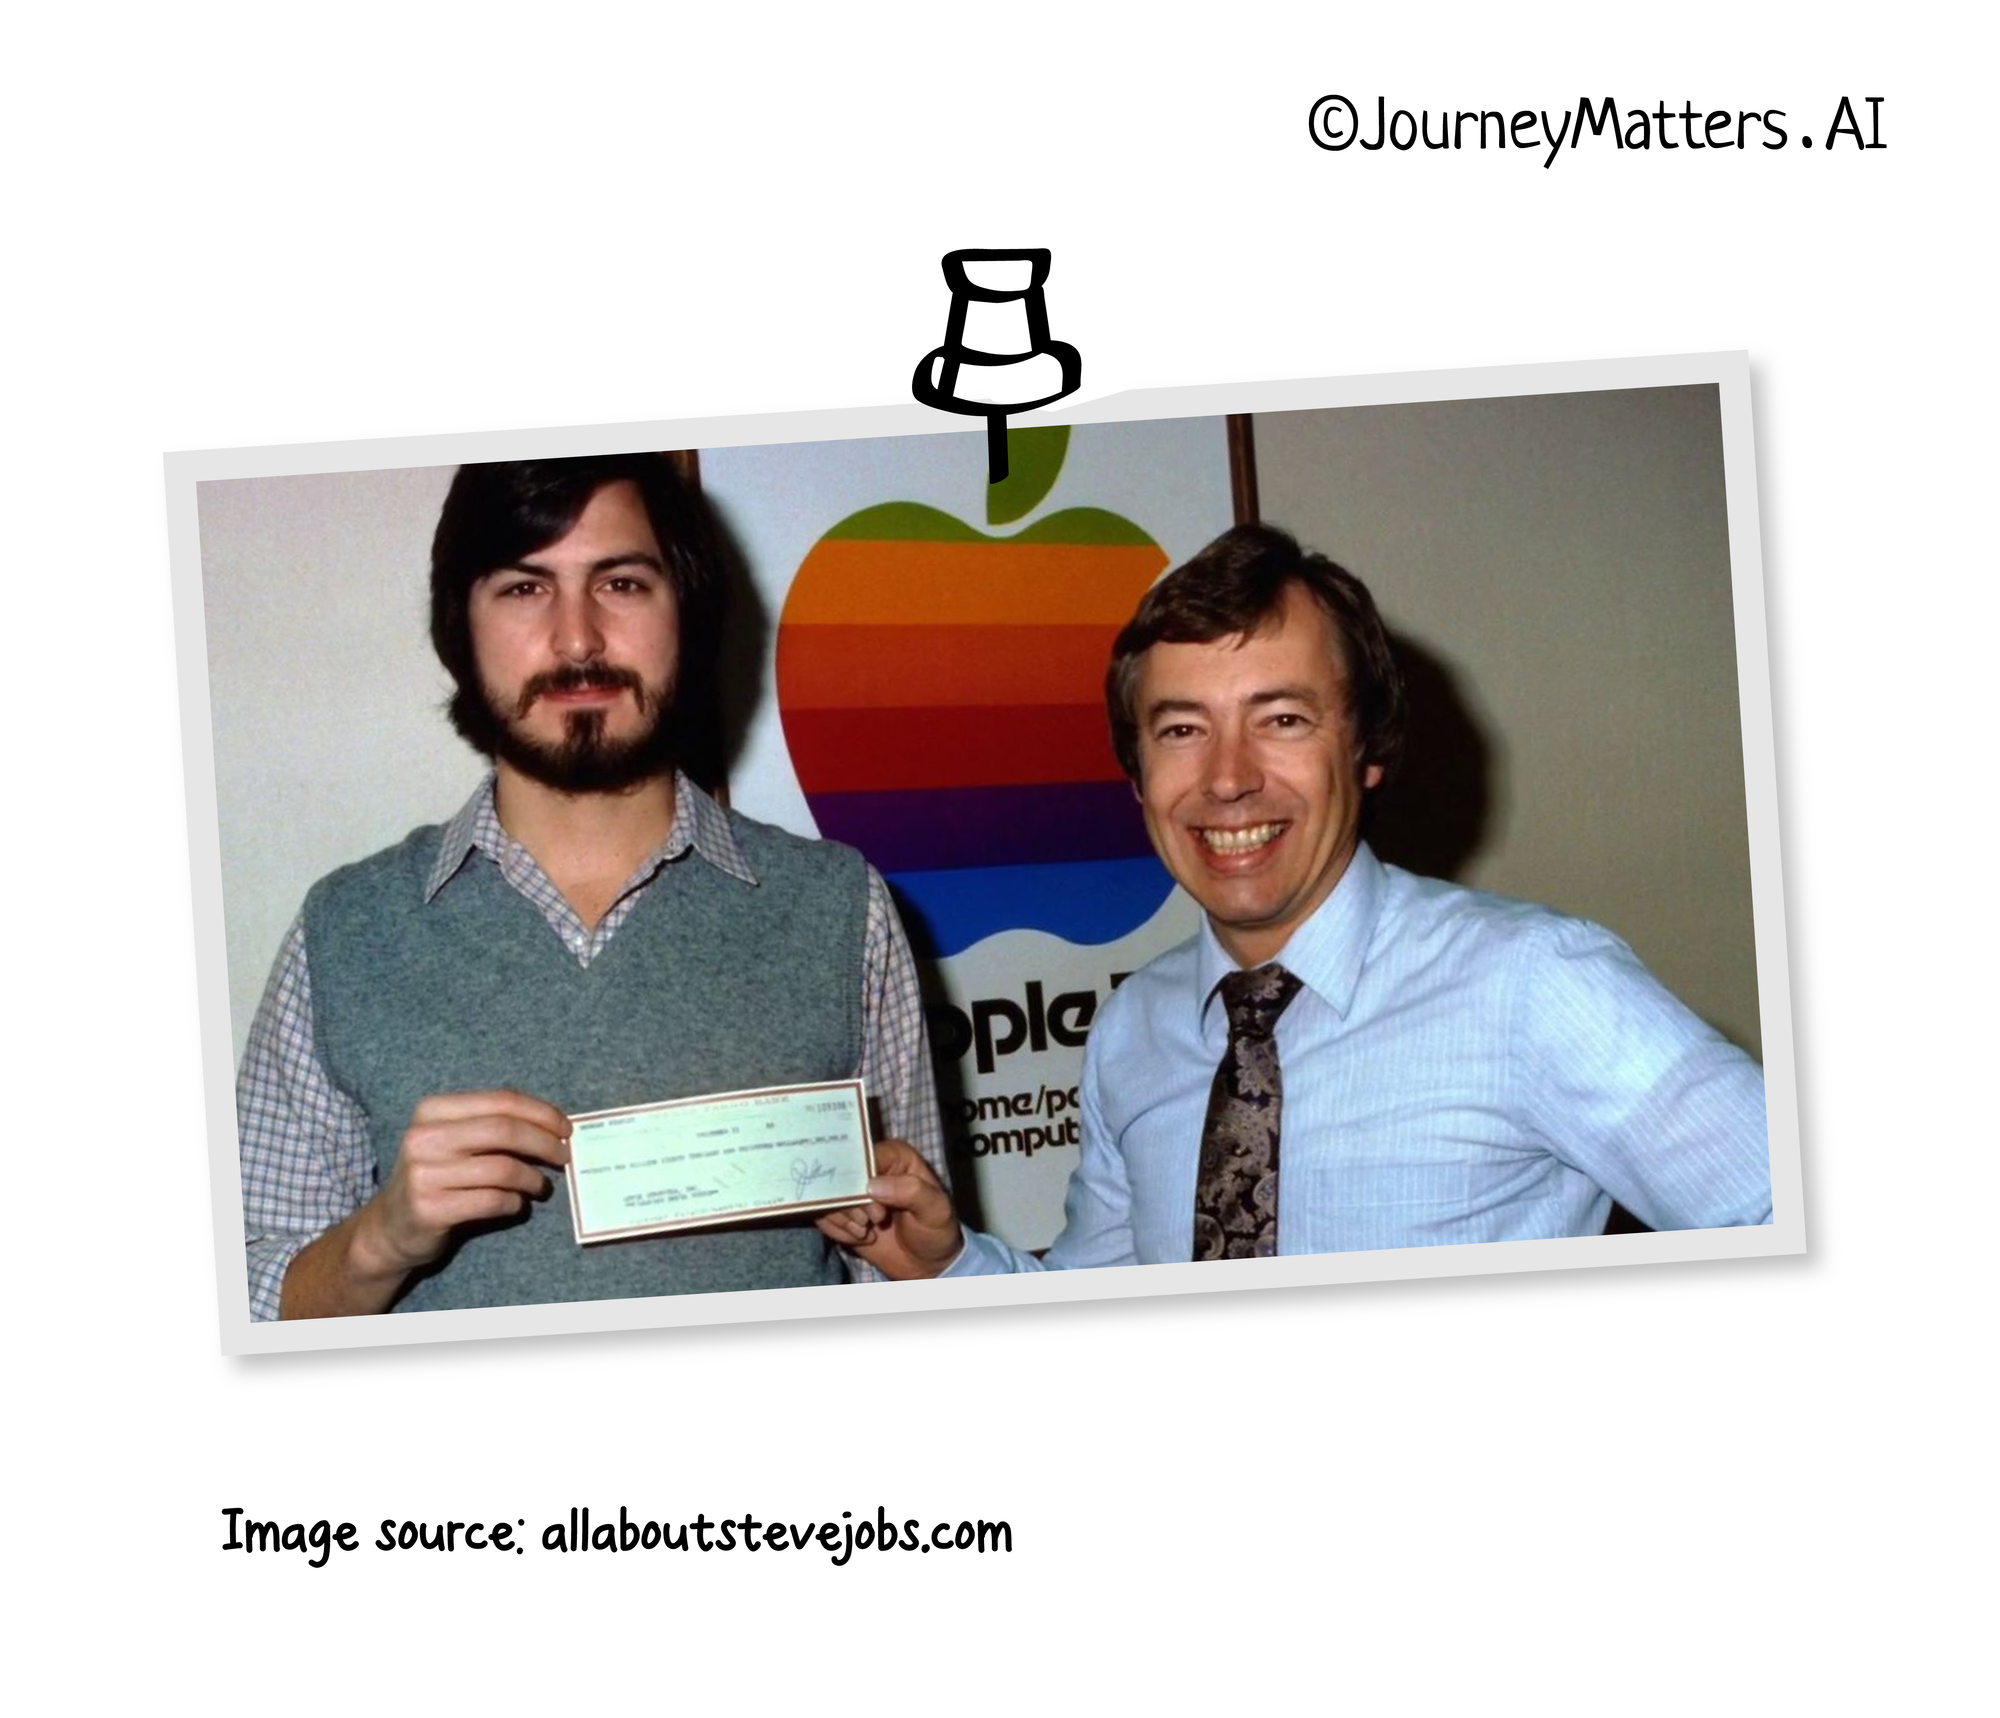 Mike Markkula, the first investor of Apple, handing the $250K cheque to Steve Jobs in 1977